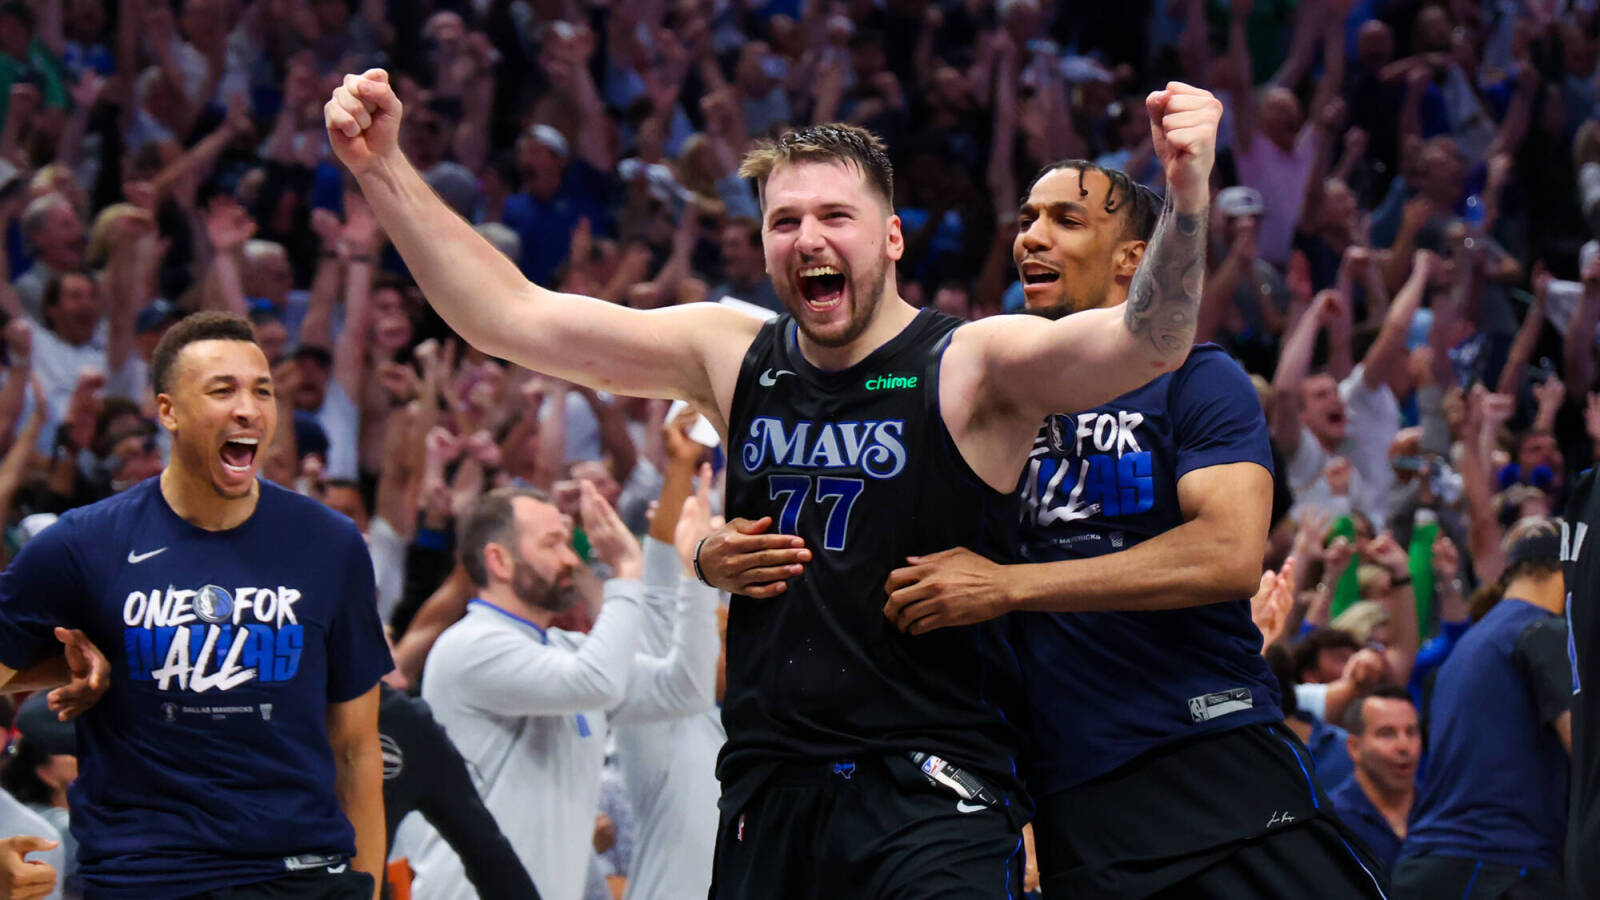 Mavericks advance to Western Conference Finals aided by controversial call late